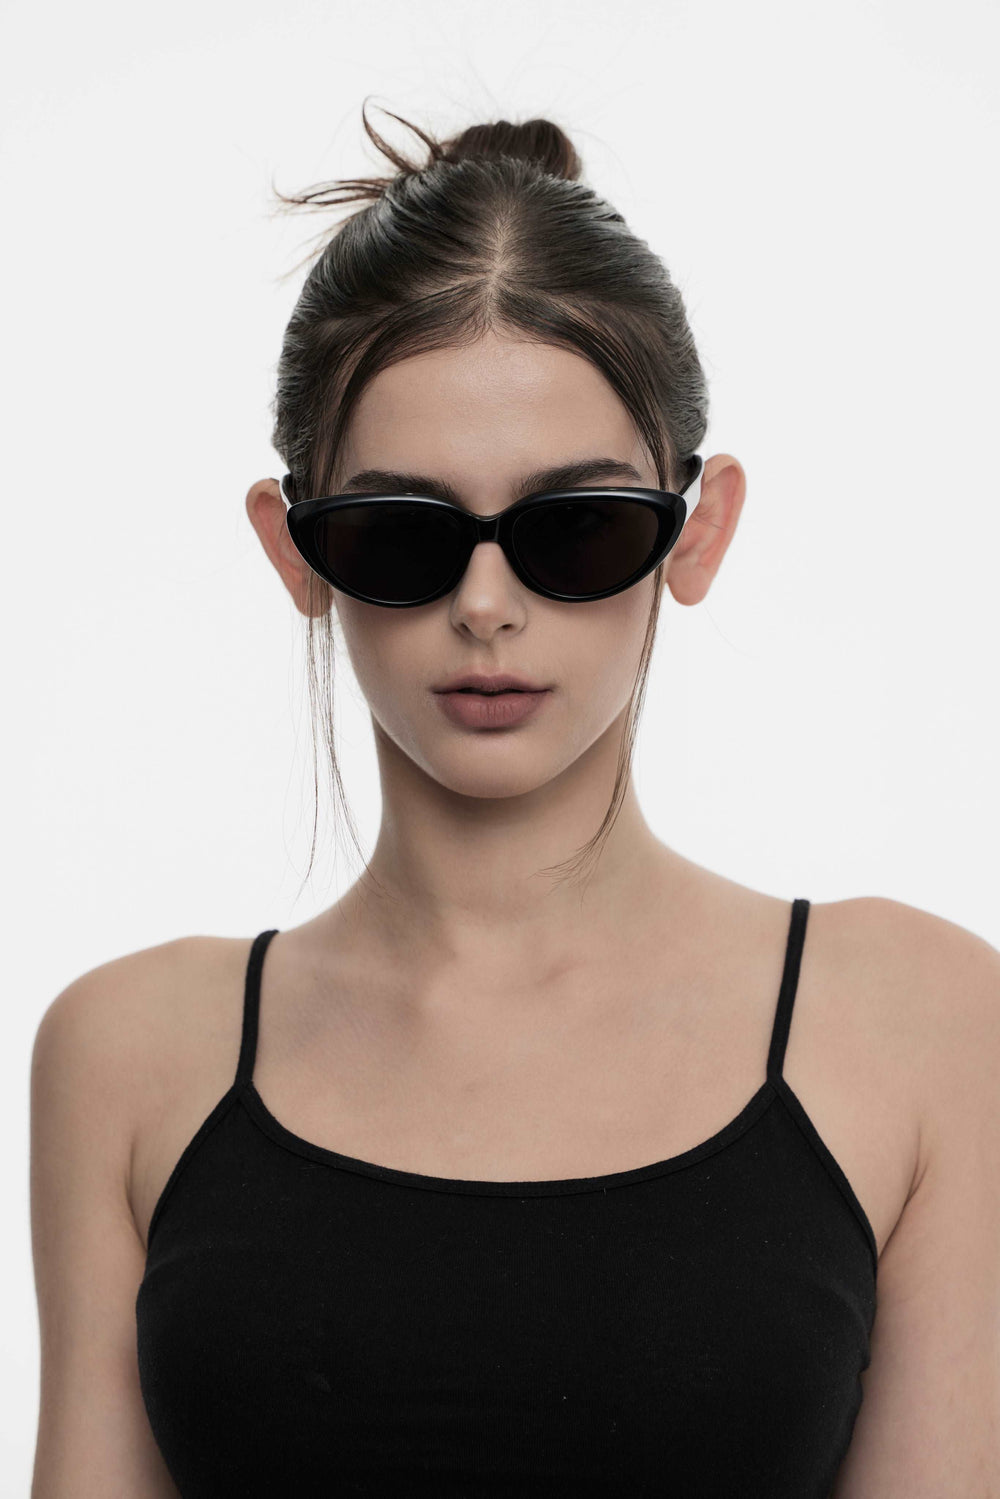 Female Model of her front face wearing Daydream’s BEBE black sunglasses for fashionistas from Mercury Retrograde